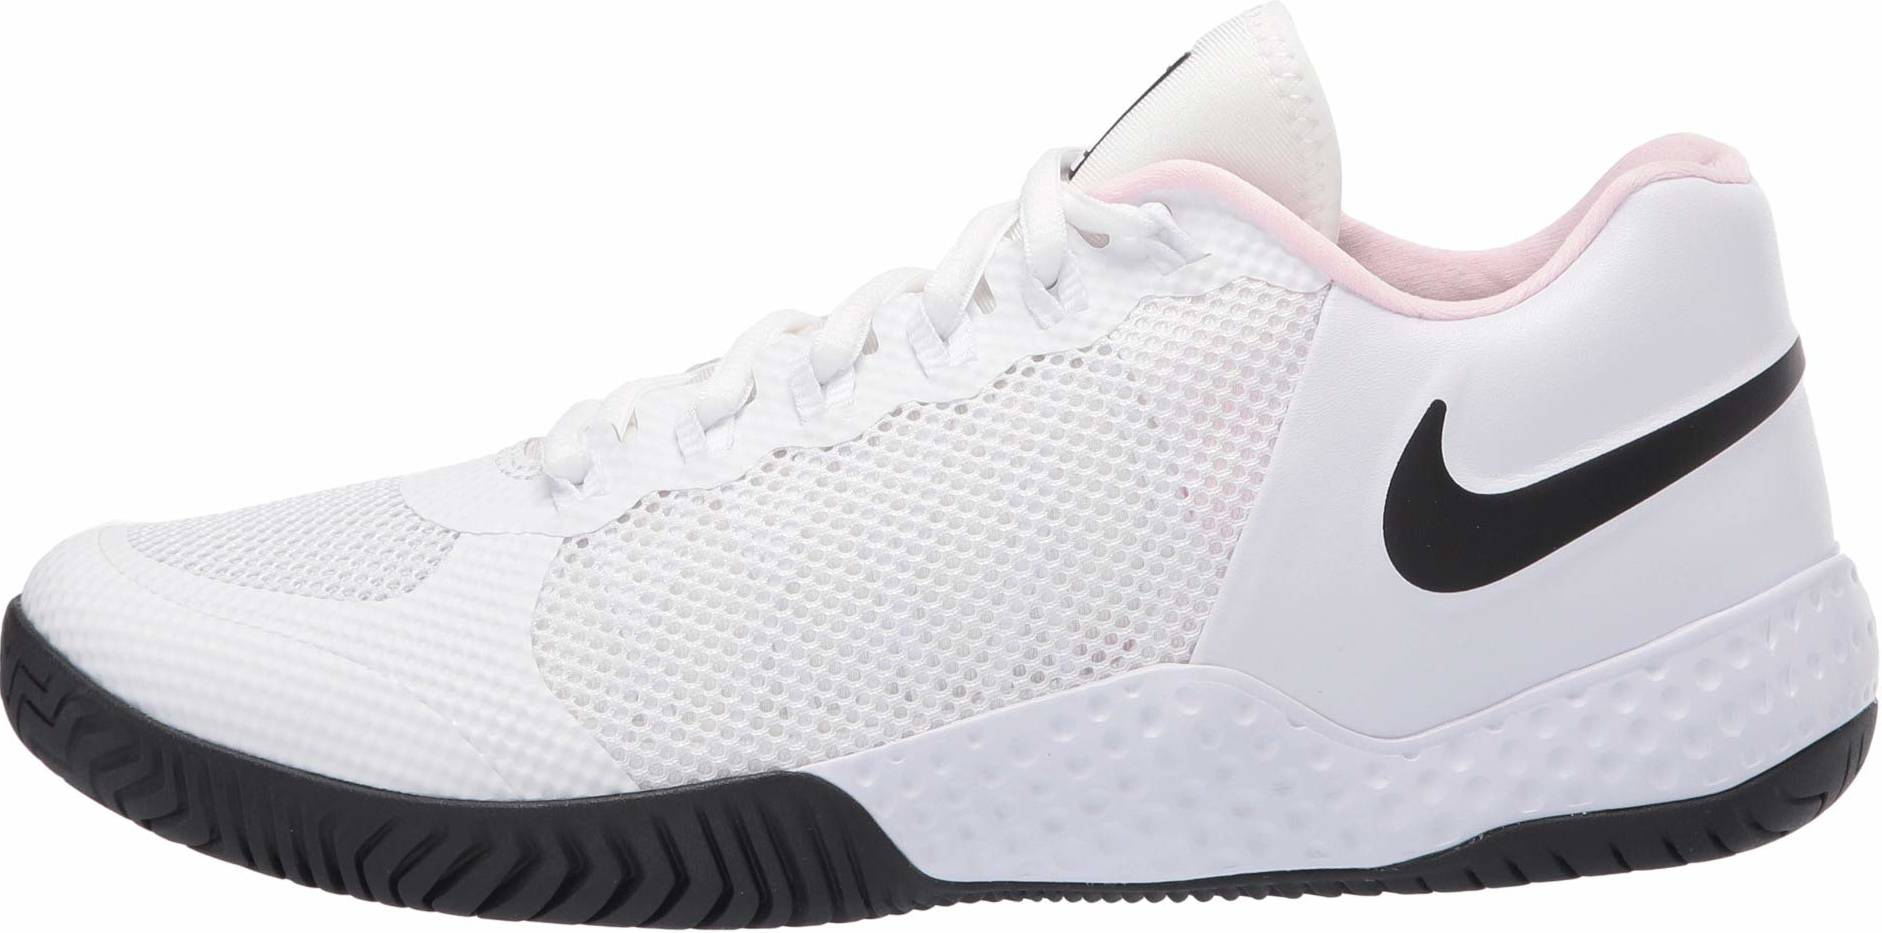 Only $51 + Review of NikeCourt Flare 2 